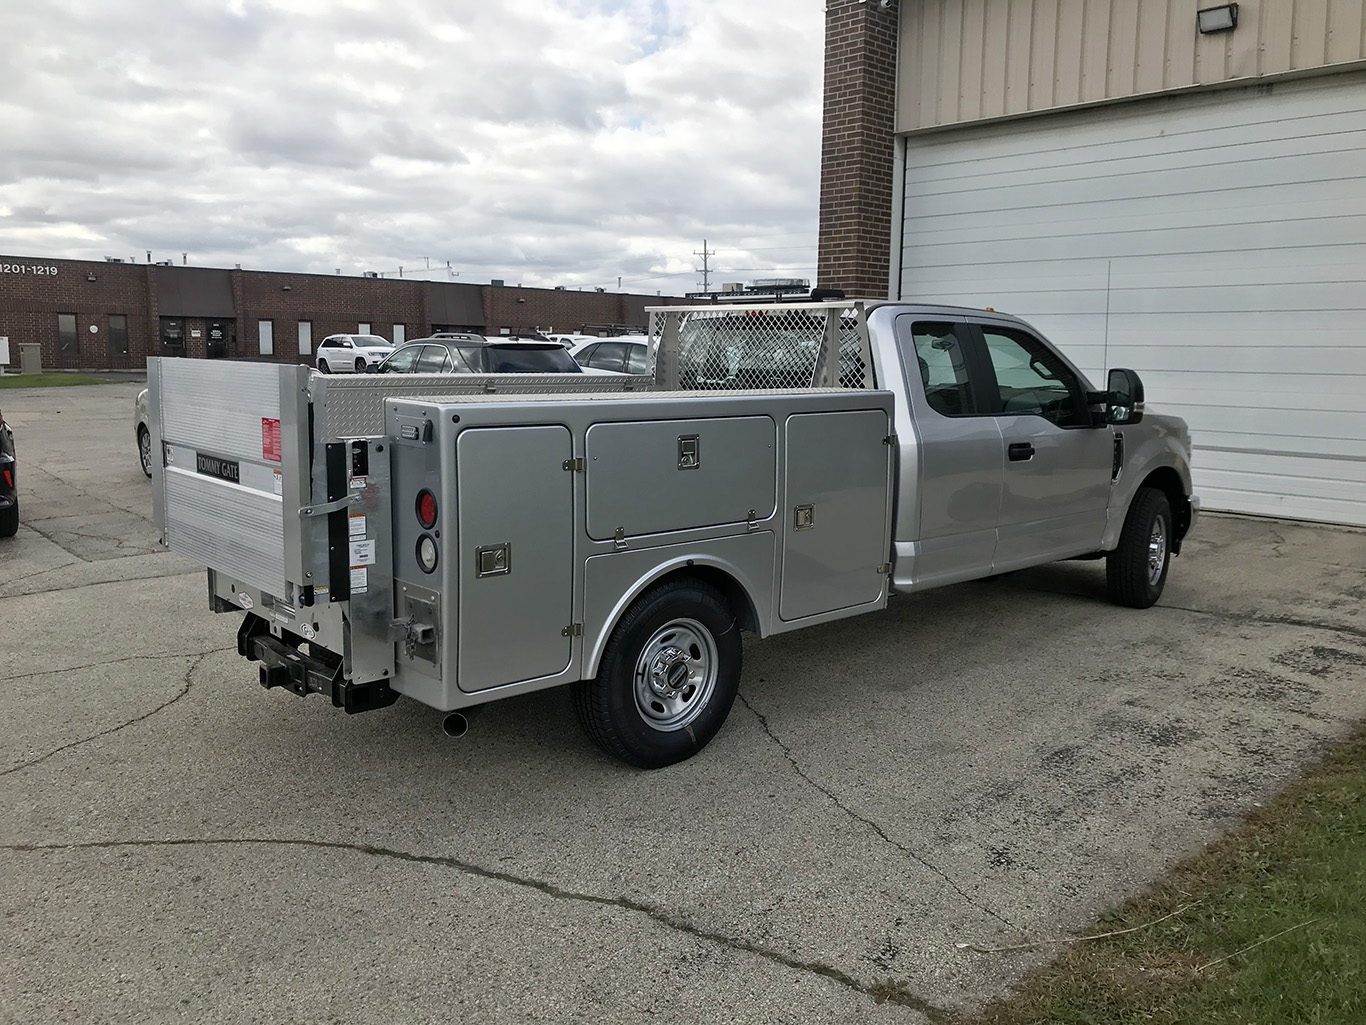 Service body with tommygate liftgate